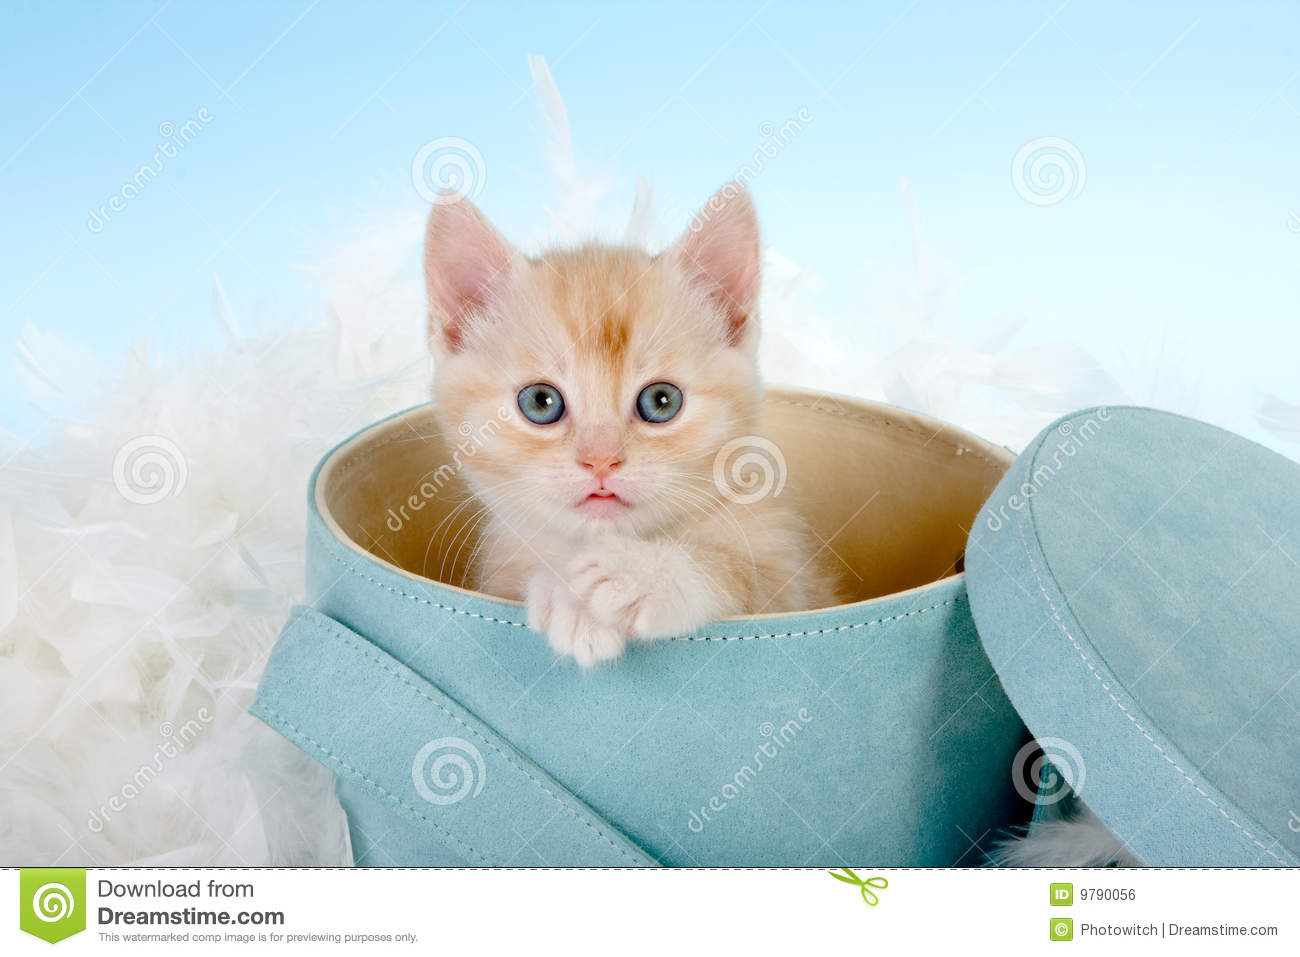 Surprised Look Royalty Free Stock Image   Image  9790056